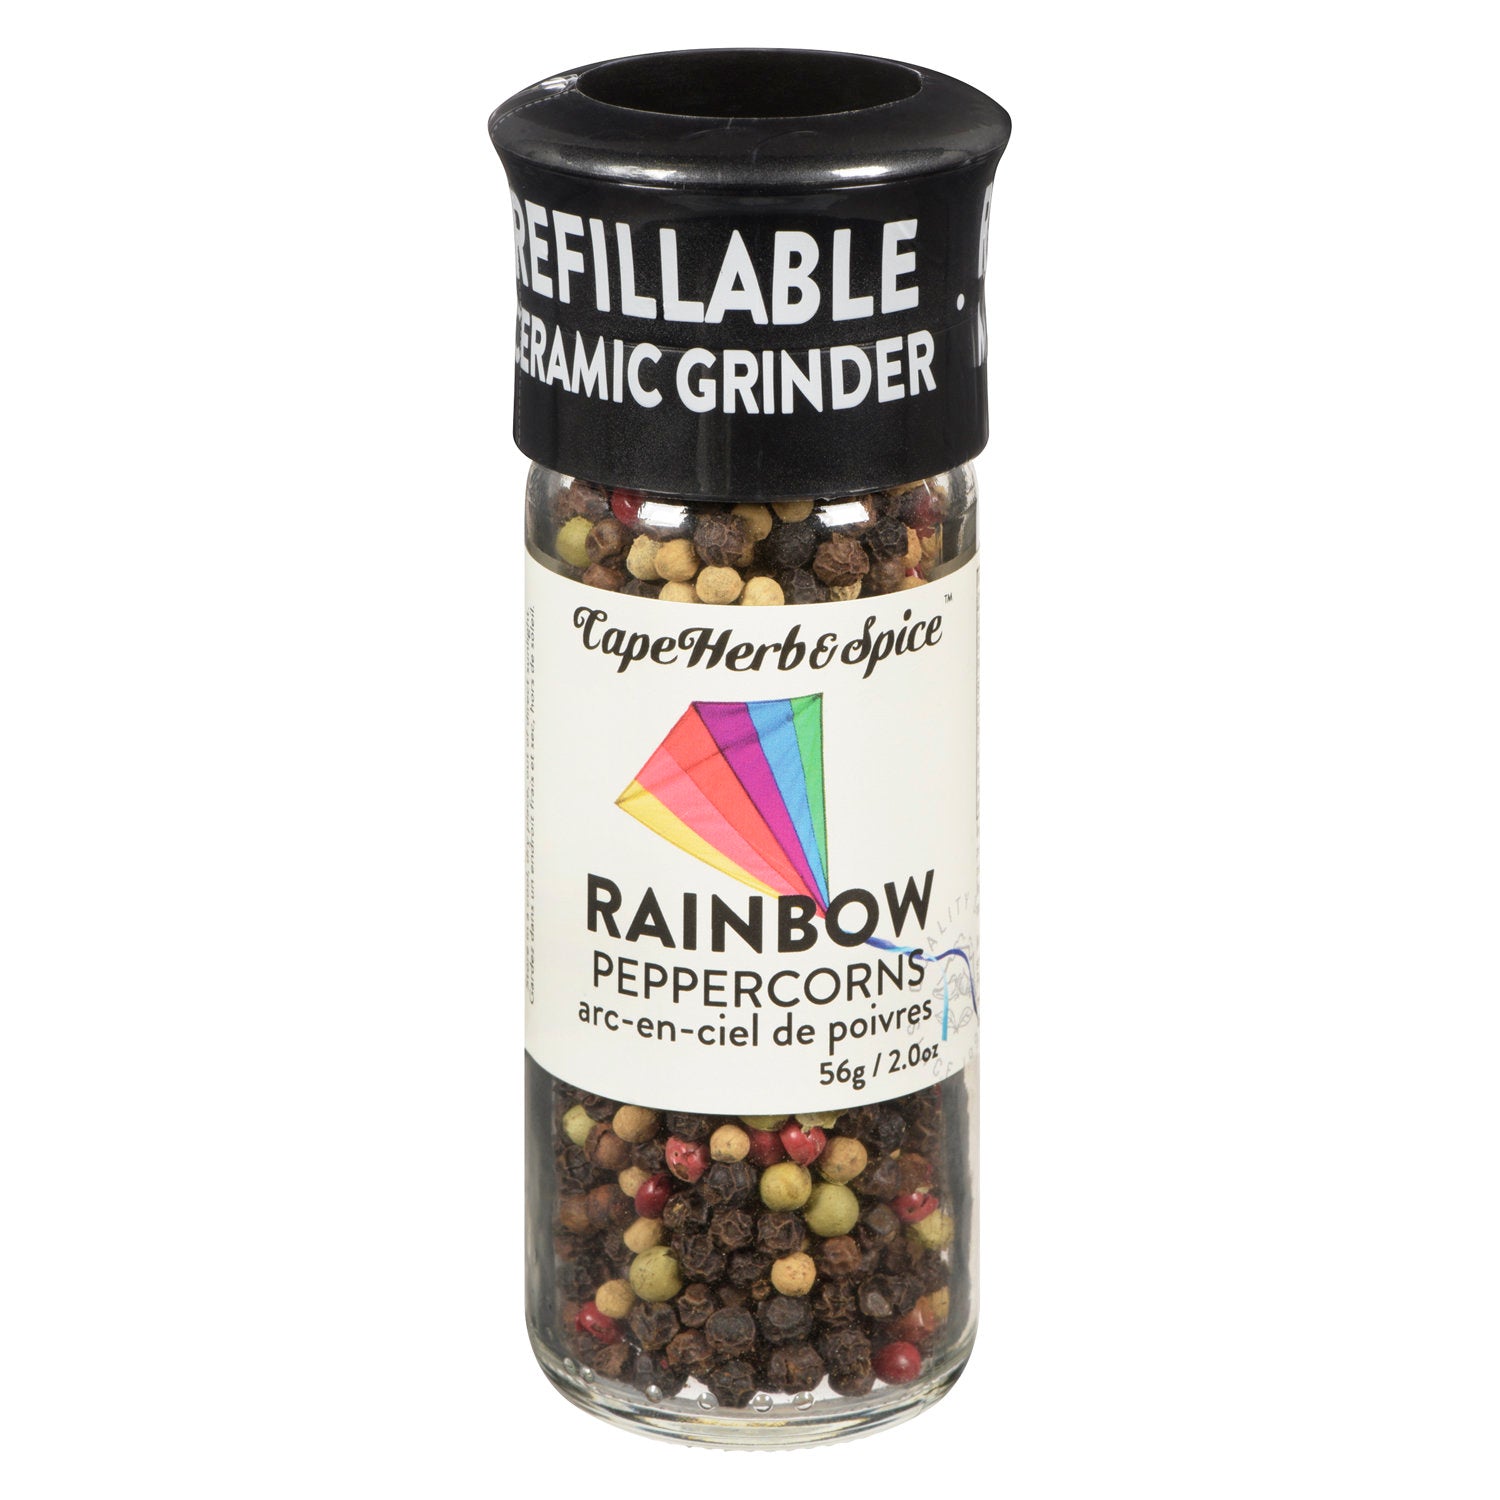 Rainbow Peppercorn - Ceramic Grinder with Refill Pack